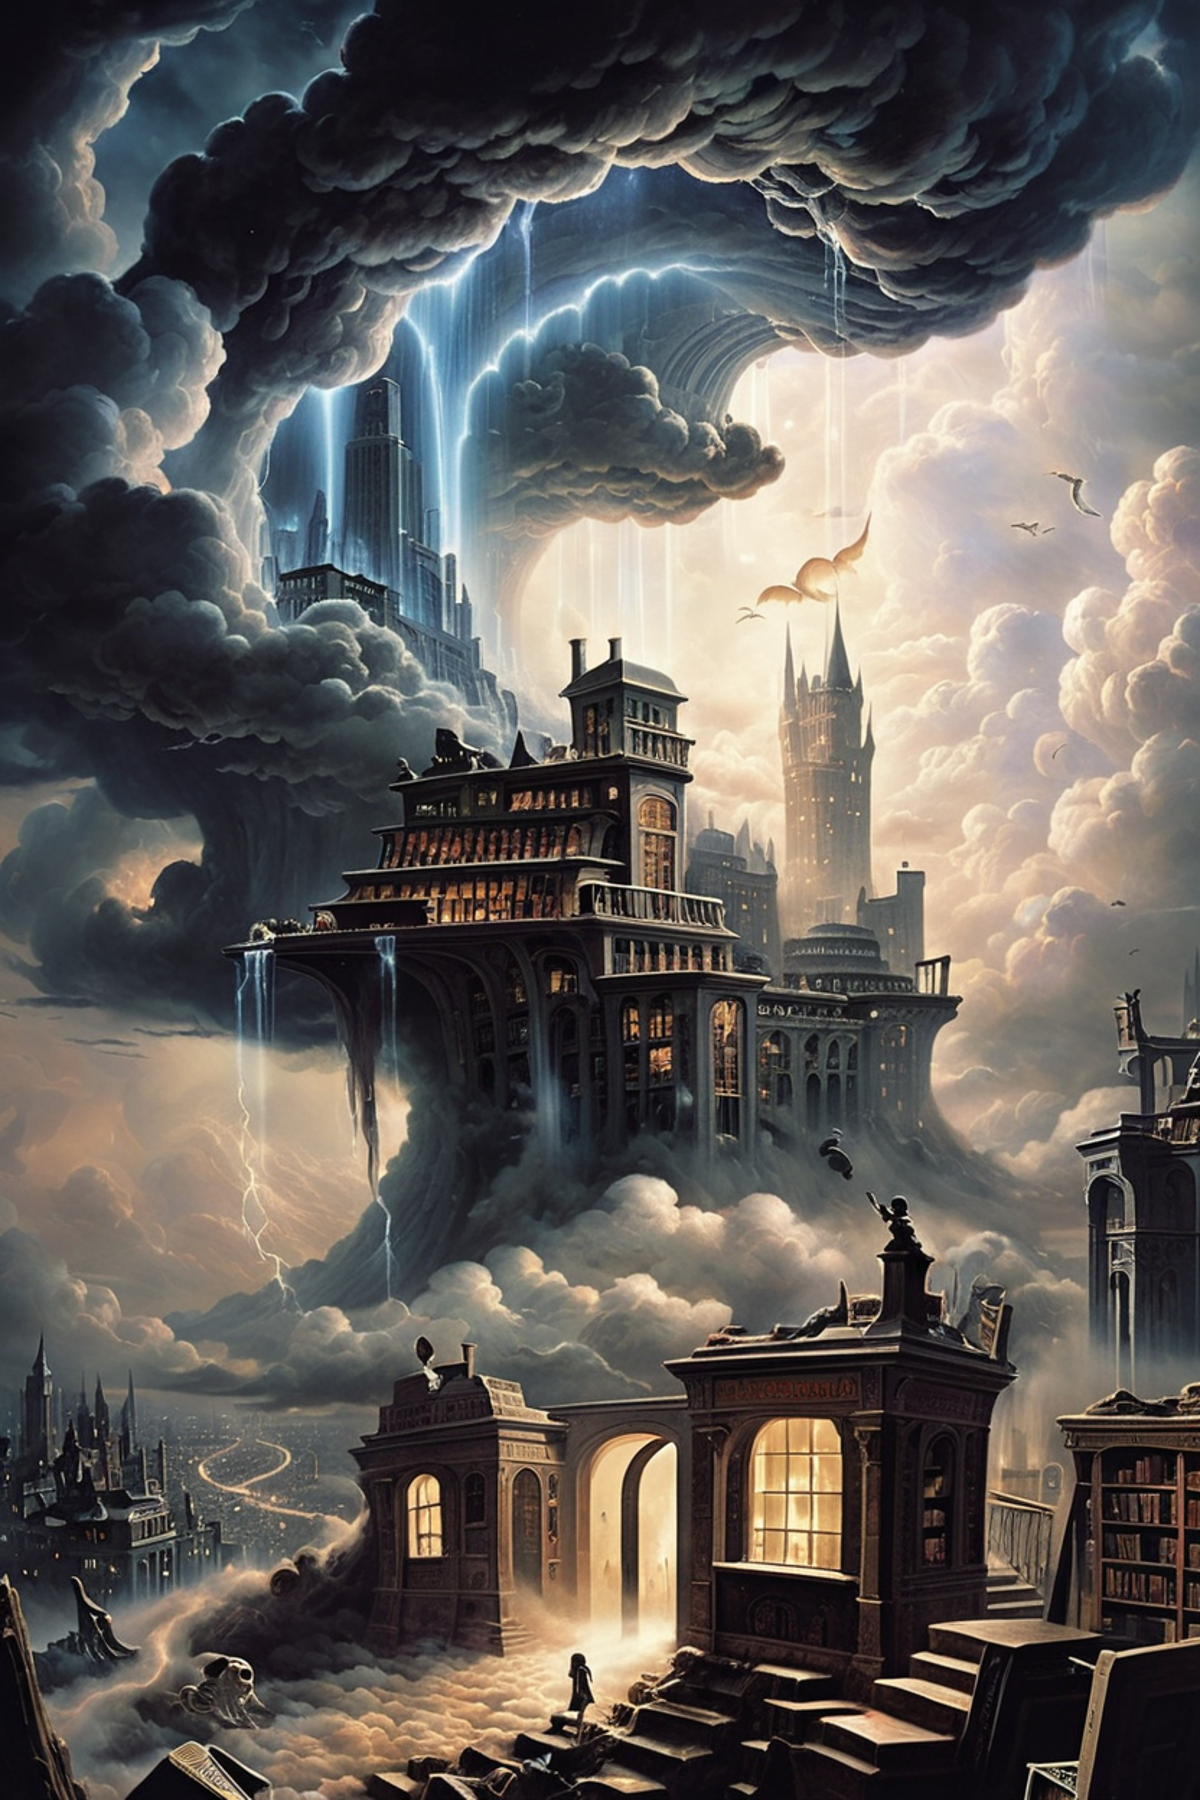 A Fantastical Cityscape with a Castle and a Dragon, Surrounded by Clouds and Buildings